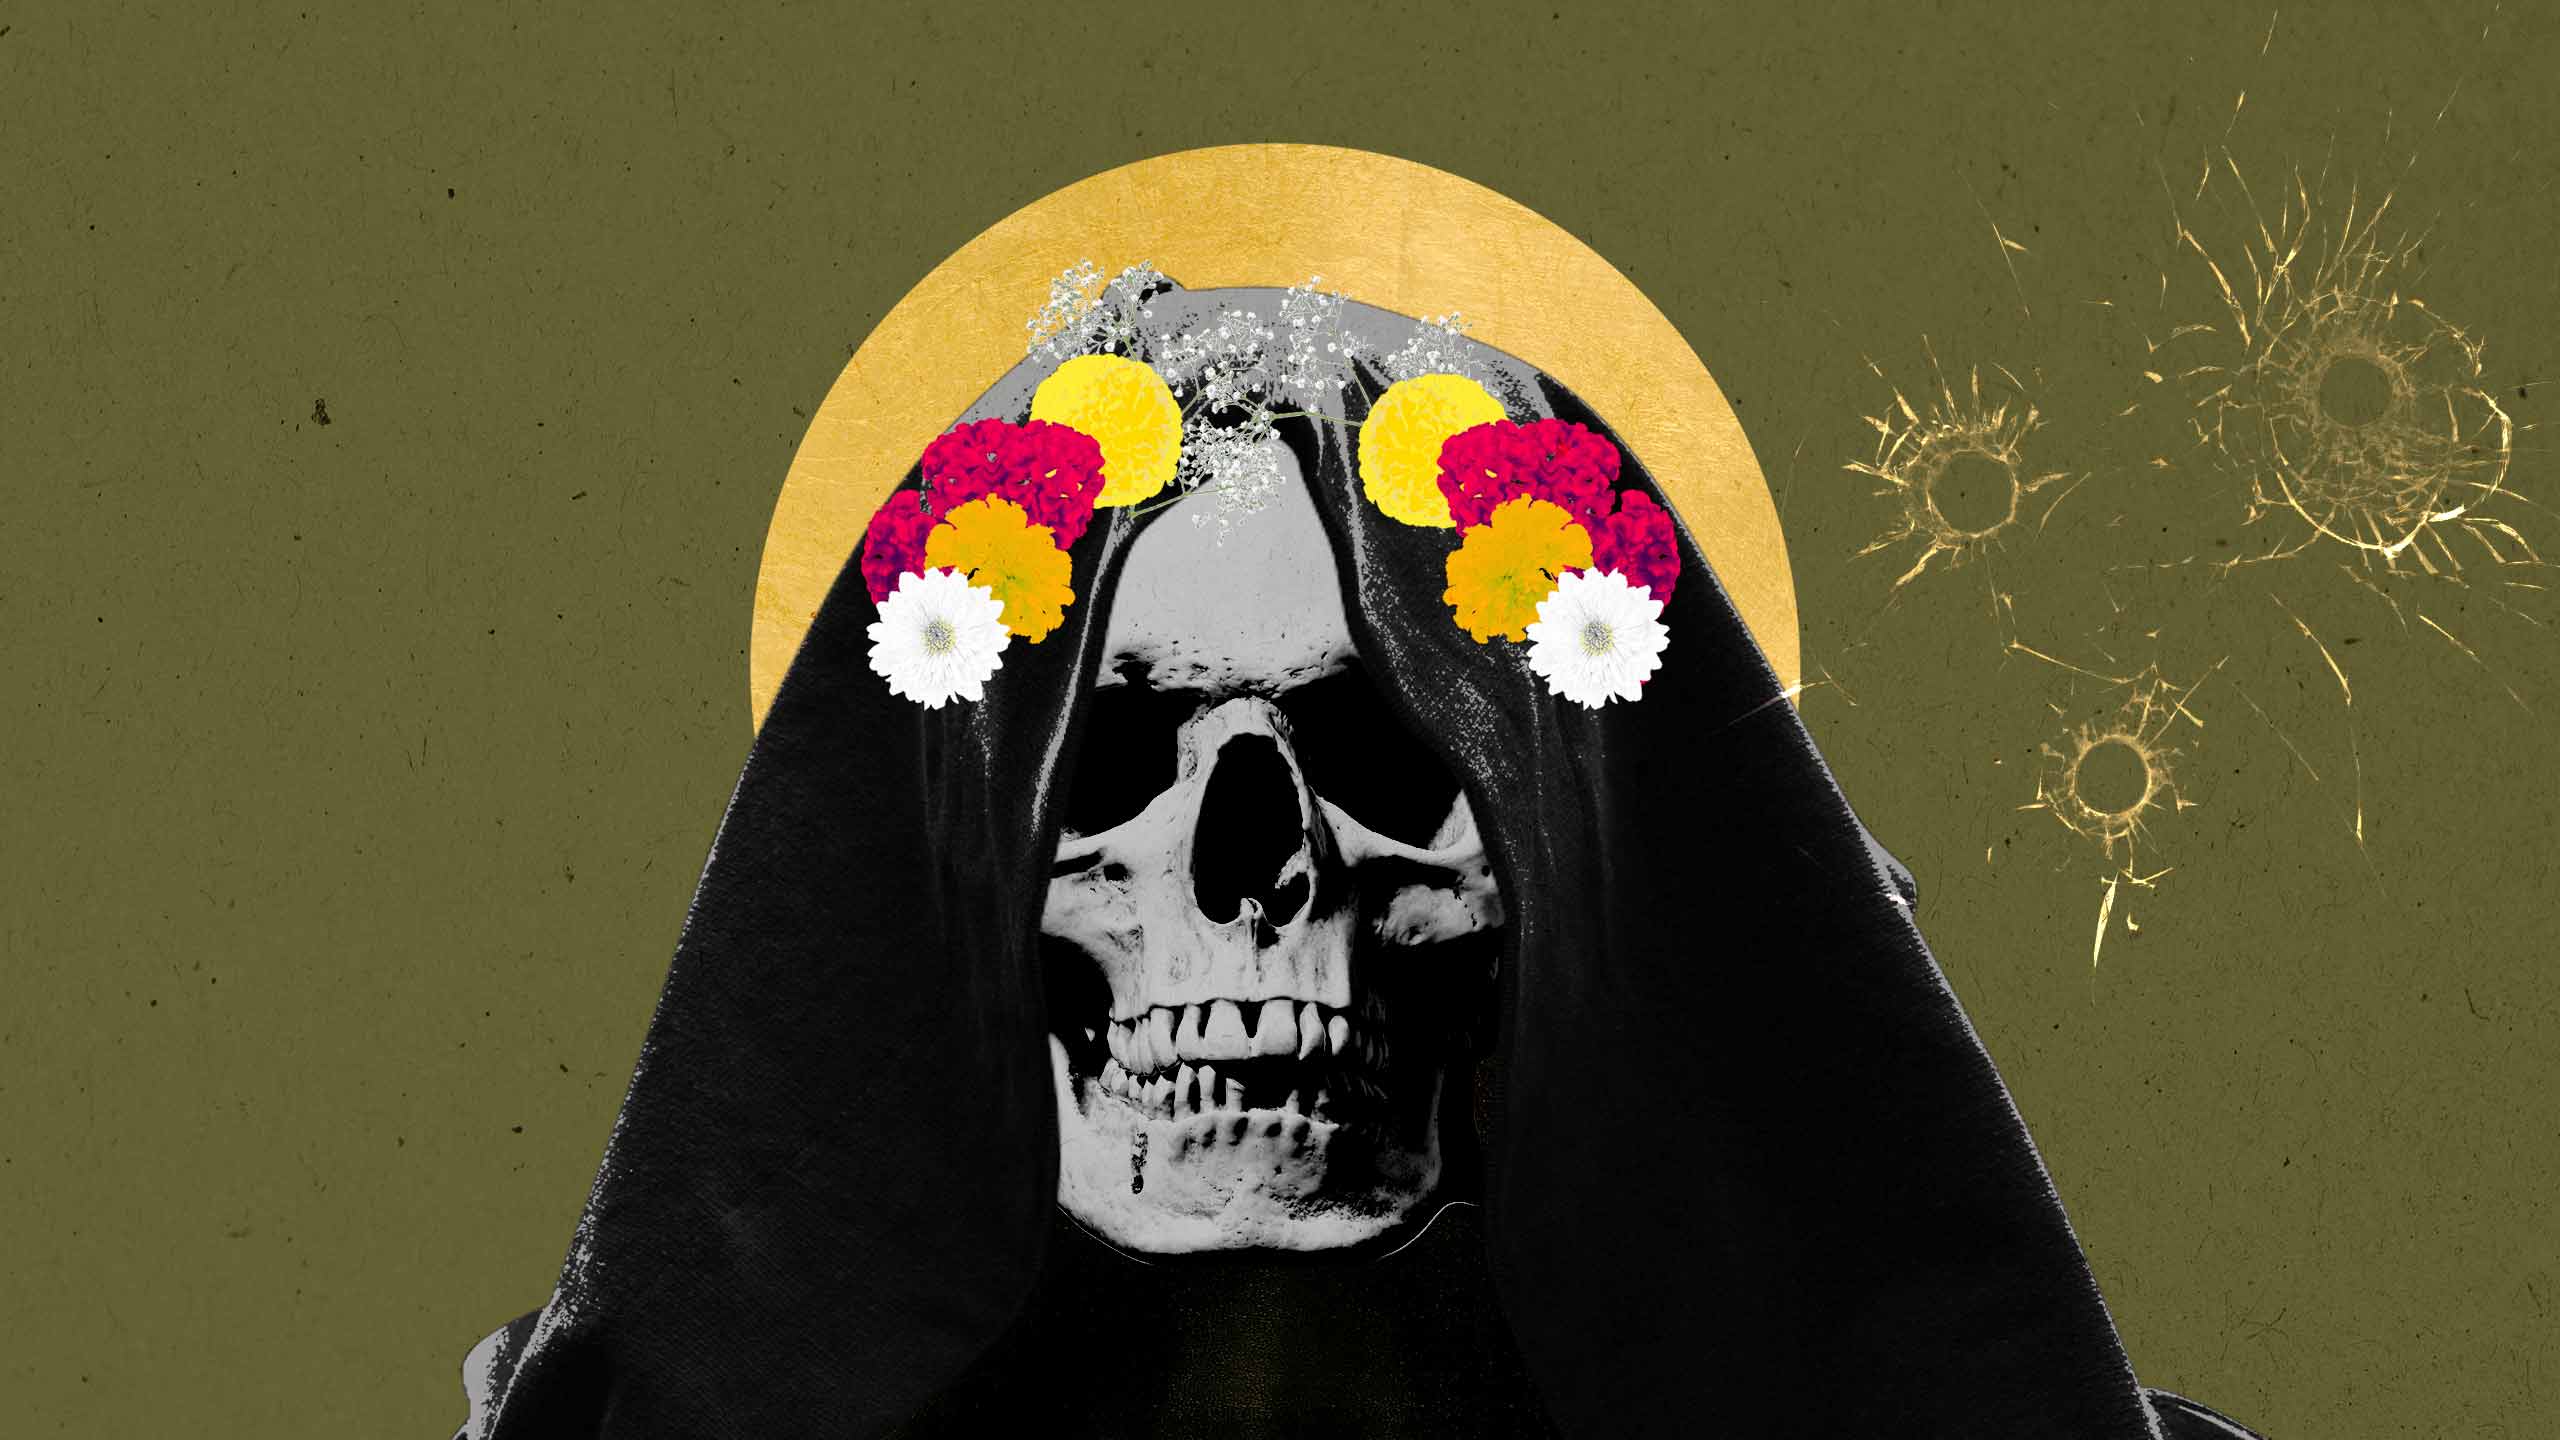 Her Son Was a High Priest of Santa Muerte. He Died in a Hail of Bullets. Now She Runs a Huge Cult